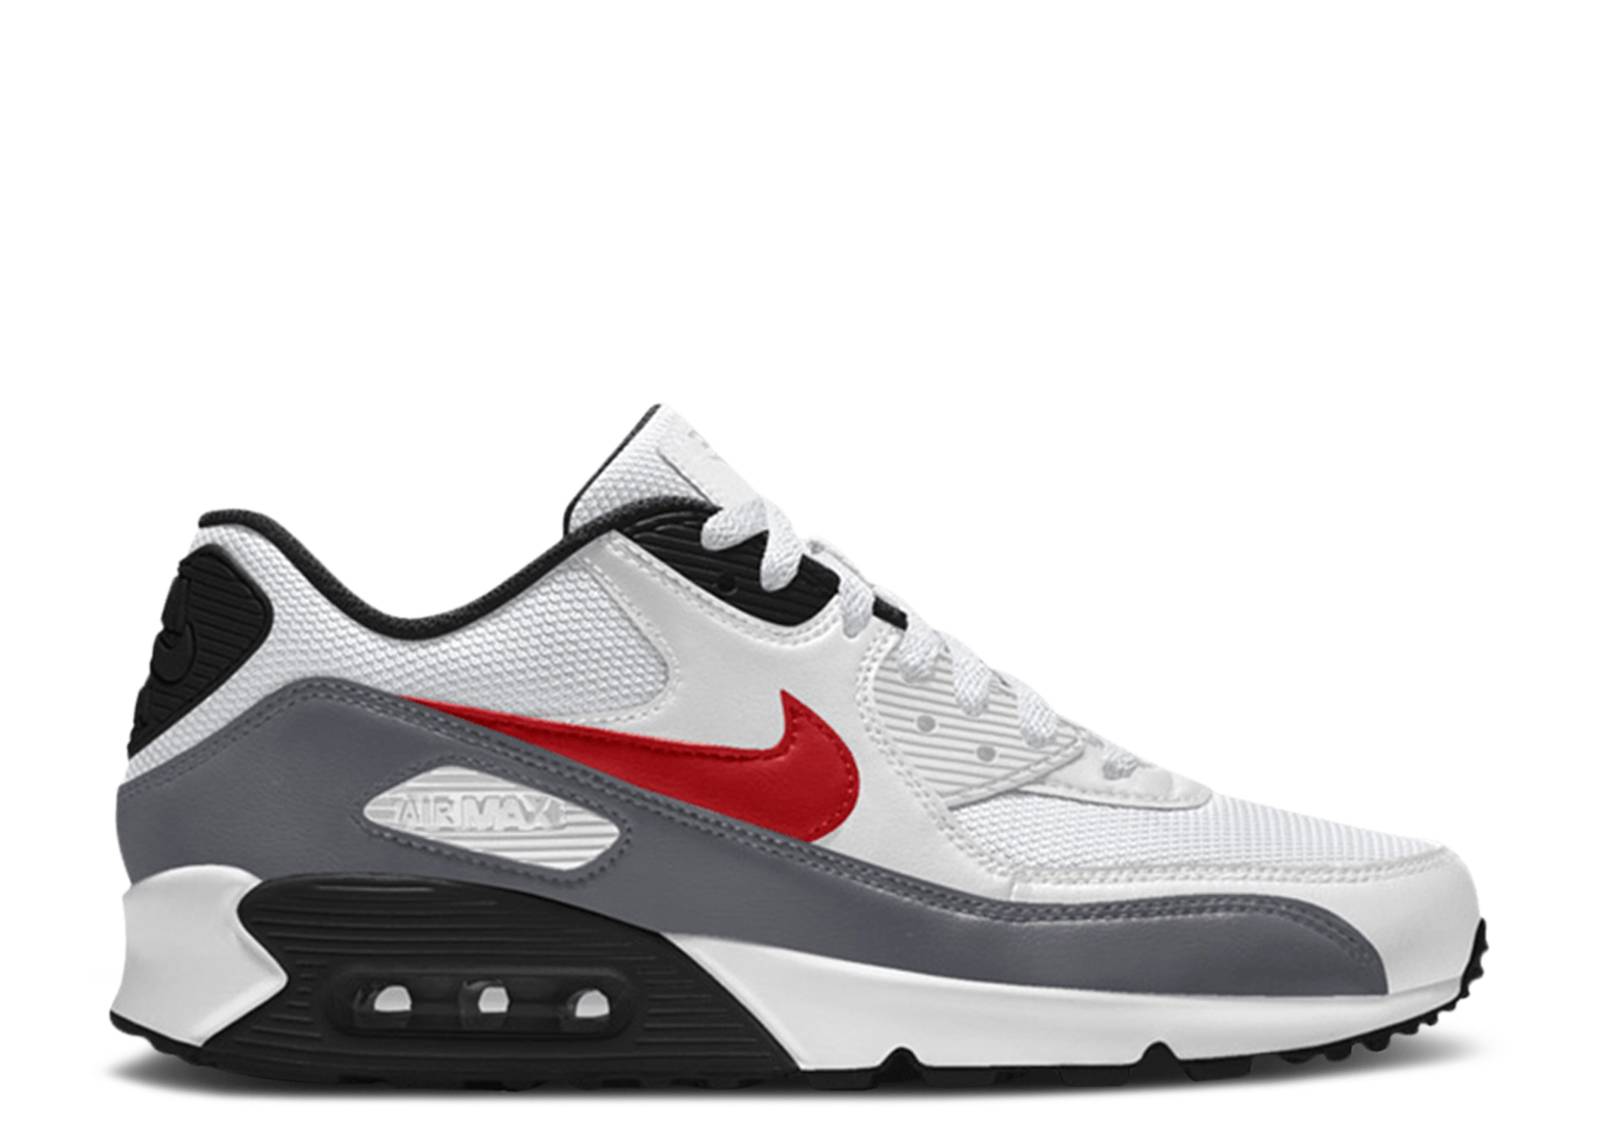 Air Max 90 Leather 'Silver Surfer'